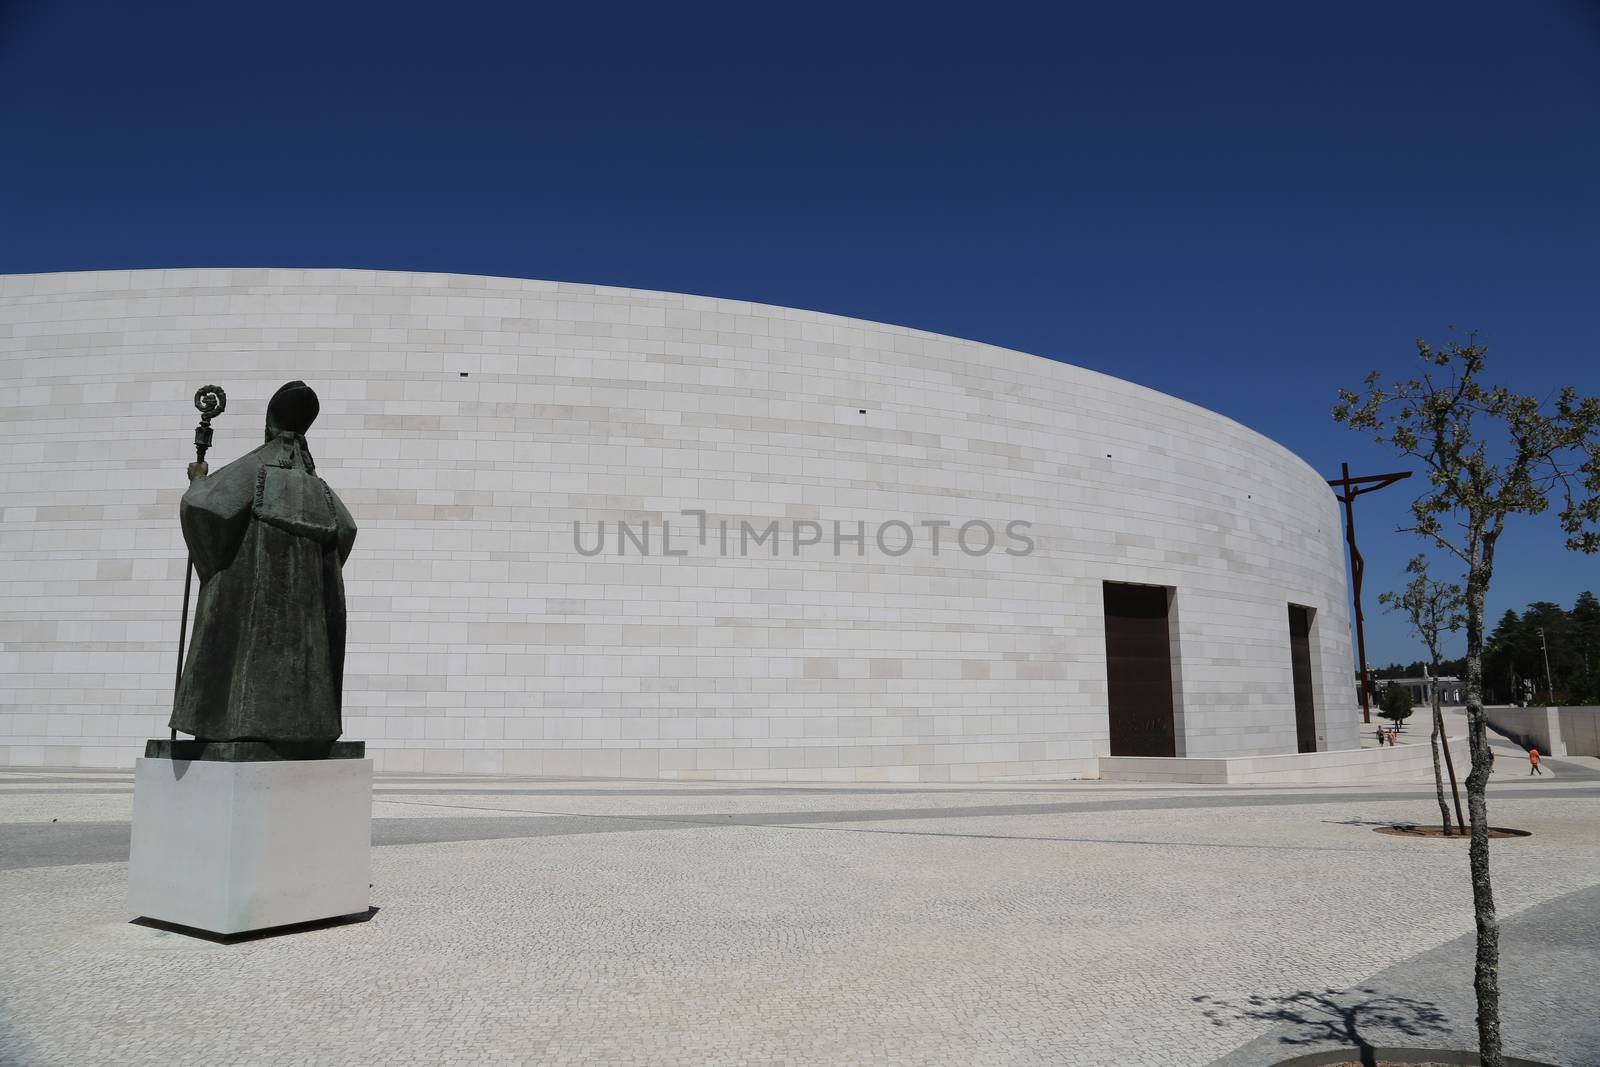 The new cathedral of the religious complex in Fatima, Portugal